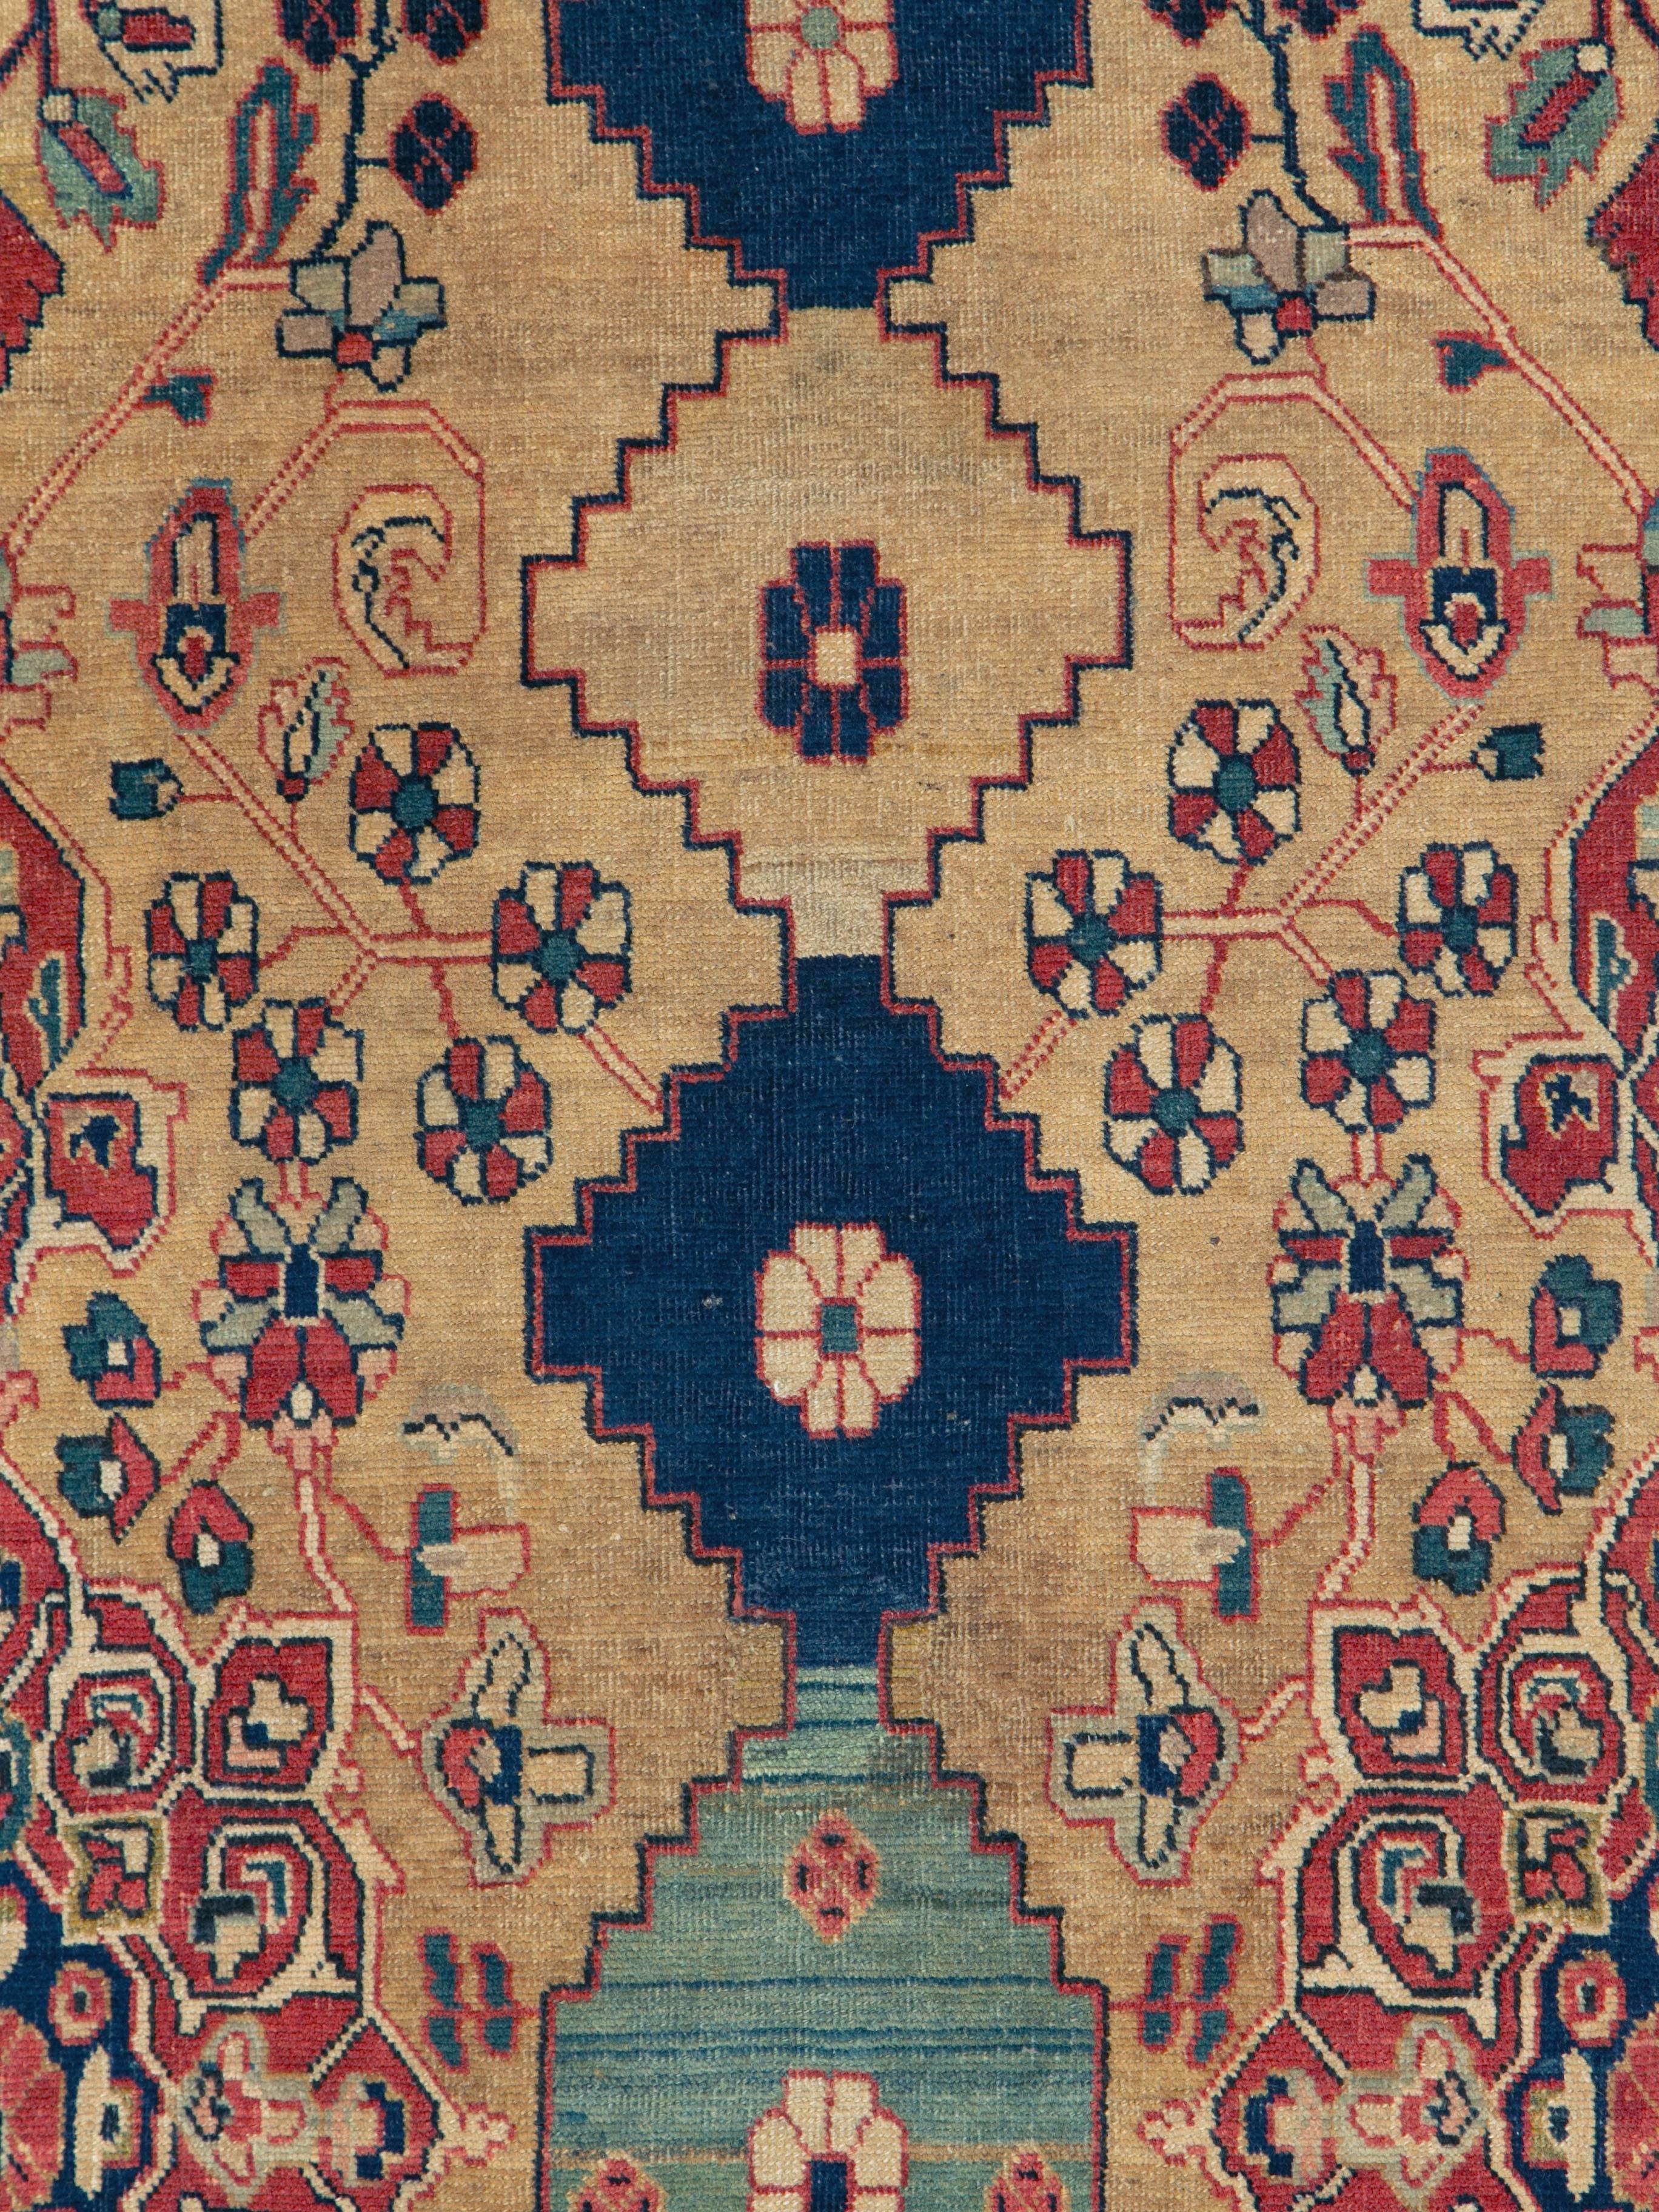 A vintage Persian Mahal rug from the mid-20th century.